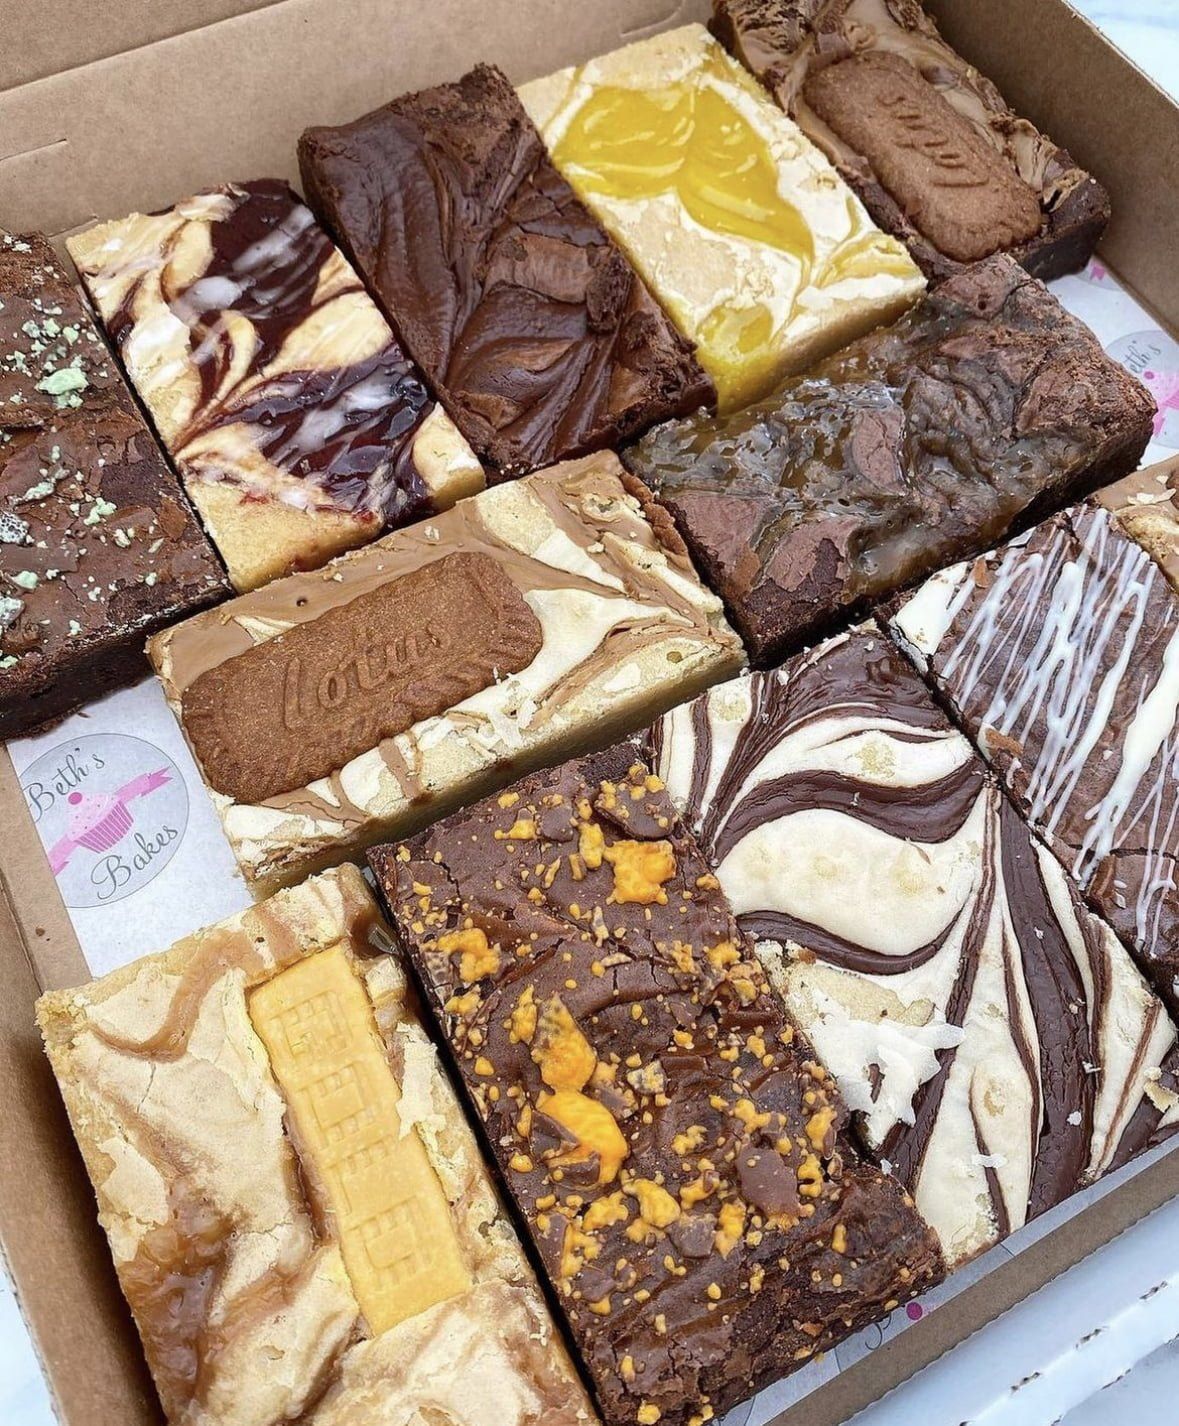 An assortment of gourmet brownies with various toppings and flavors, presented in a box from Beth's Bakes.